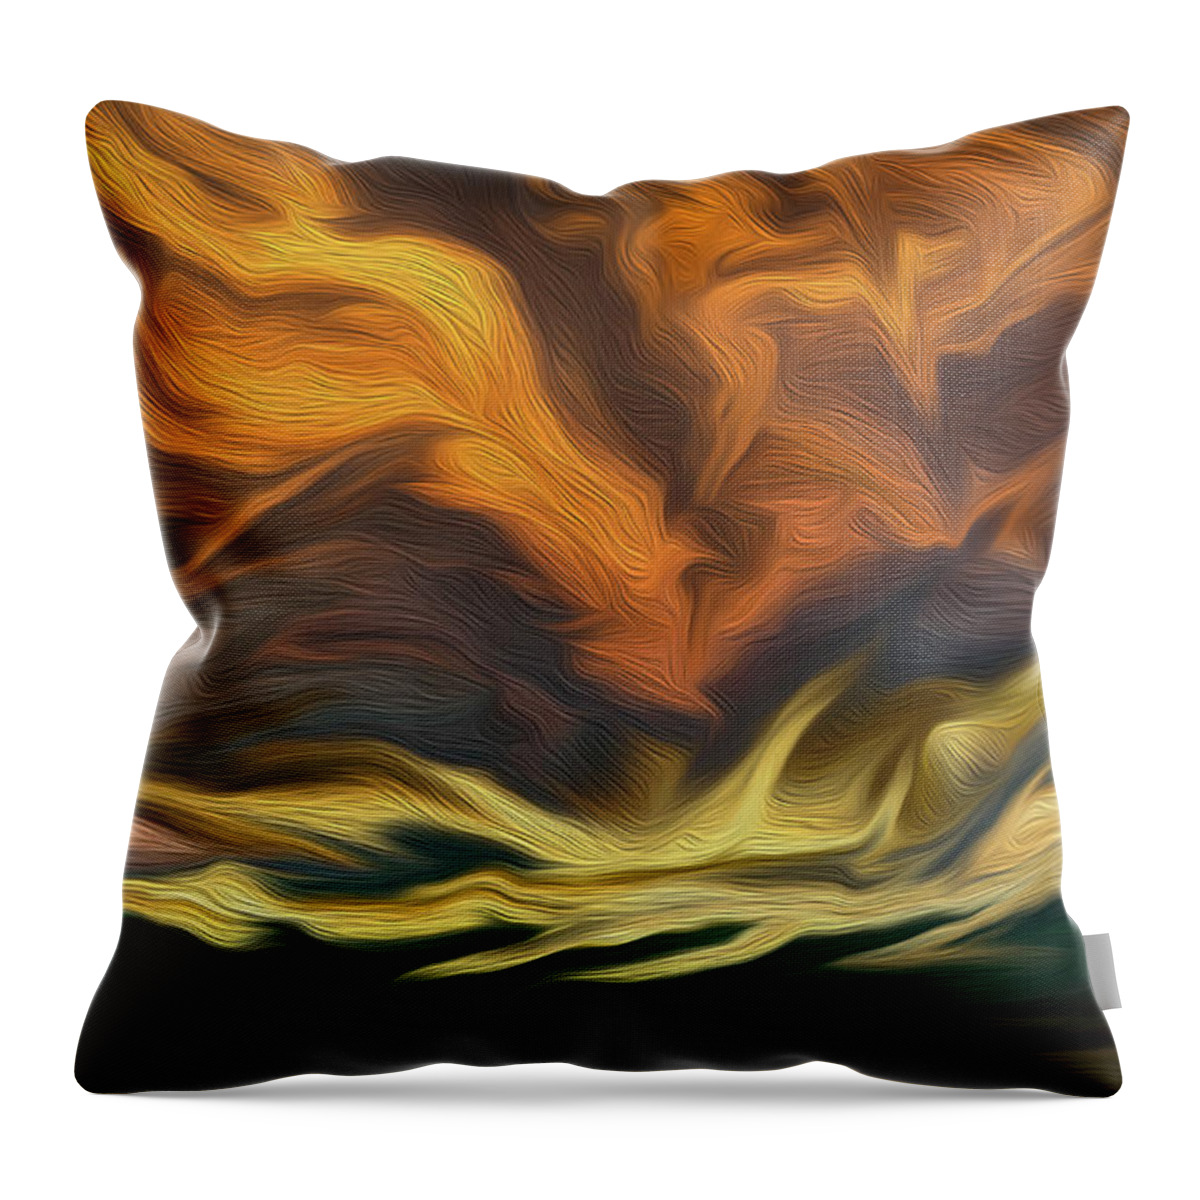 Sky Throw Pillow featuring the digital art Shepherd's Delight by Vincent Franco